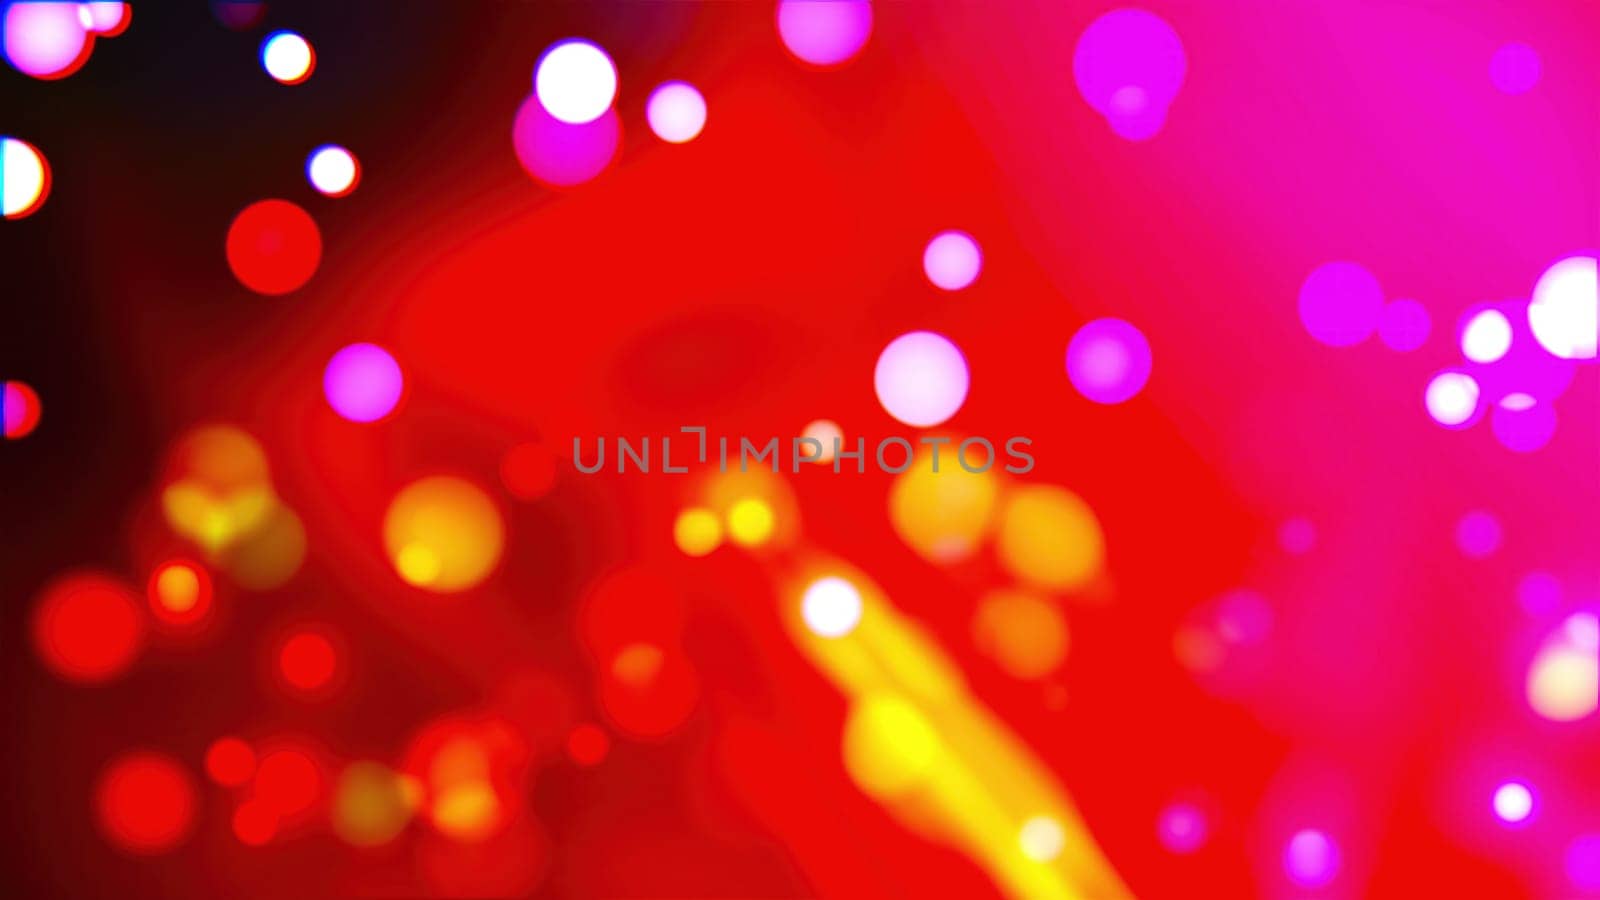 Bokeh particles with gradient background. Computer generated 3d render